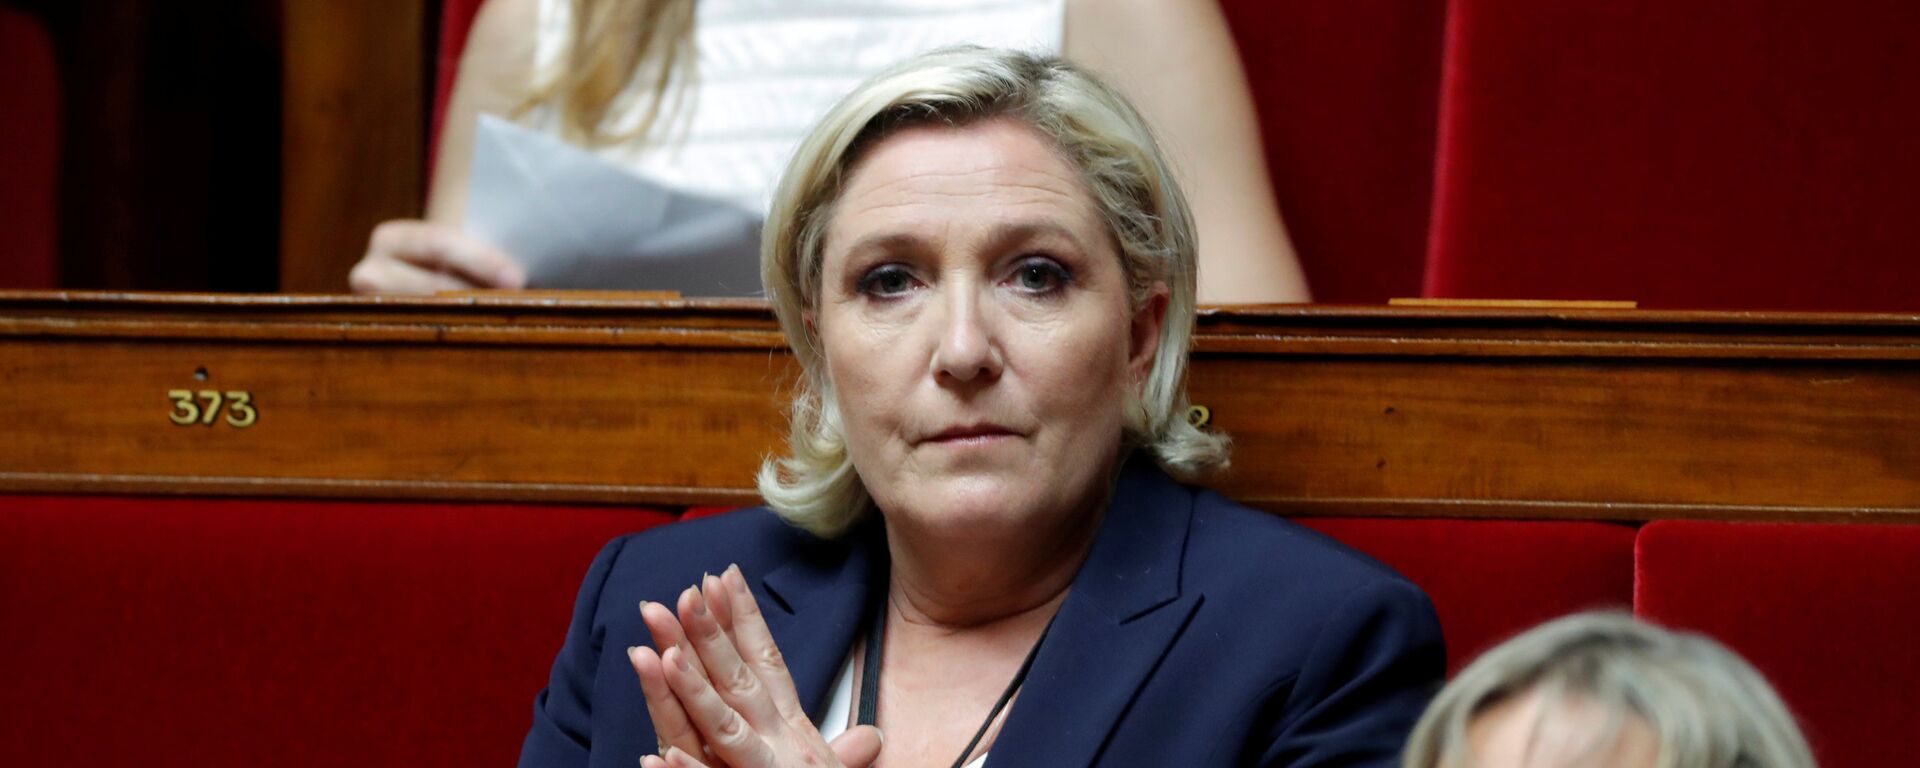 Marine Le Pen of France's National Front (FN) political party at the opening session of the French National Assembly in Paris, France, June 27, 2017 - Sputnik International, 1920, 02.03.2022